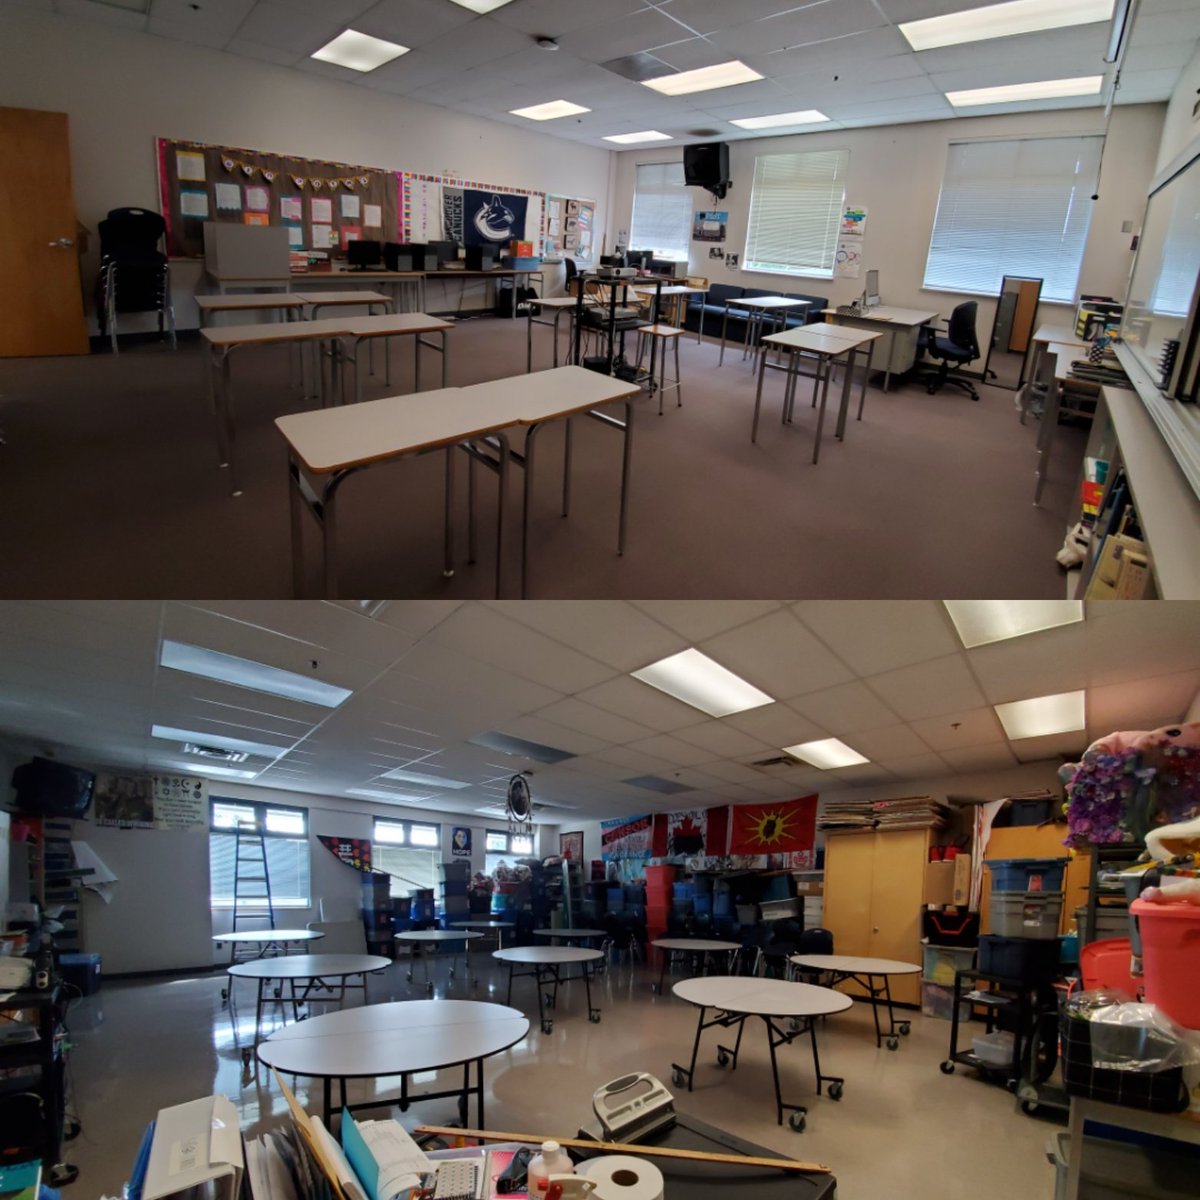 What you will notice in all the pictures, there is simply no way to fit even 20 students into any type of classroom: band room, portable to regular size room. We teachers spent agonizing days trying to configure our rooms for June and for Sept.  @adriandix  @jjhorgan